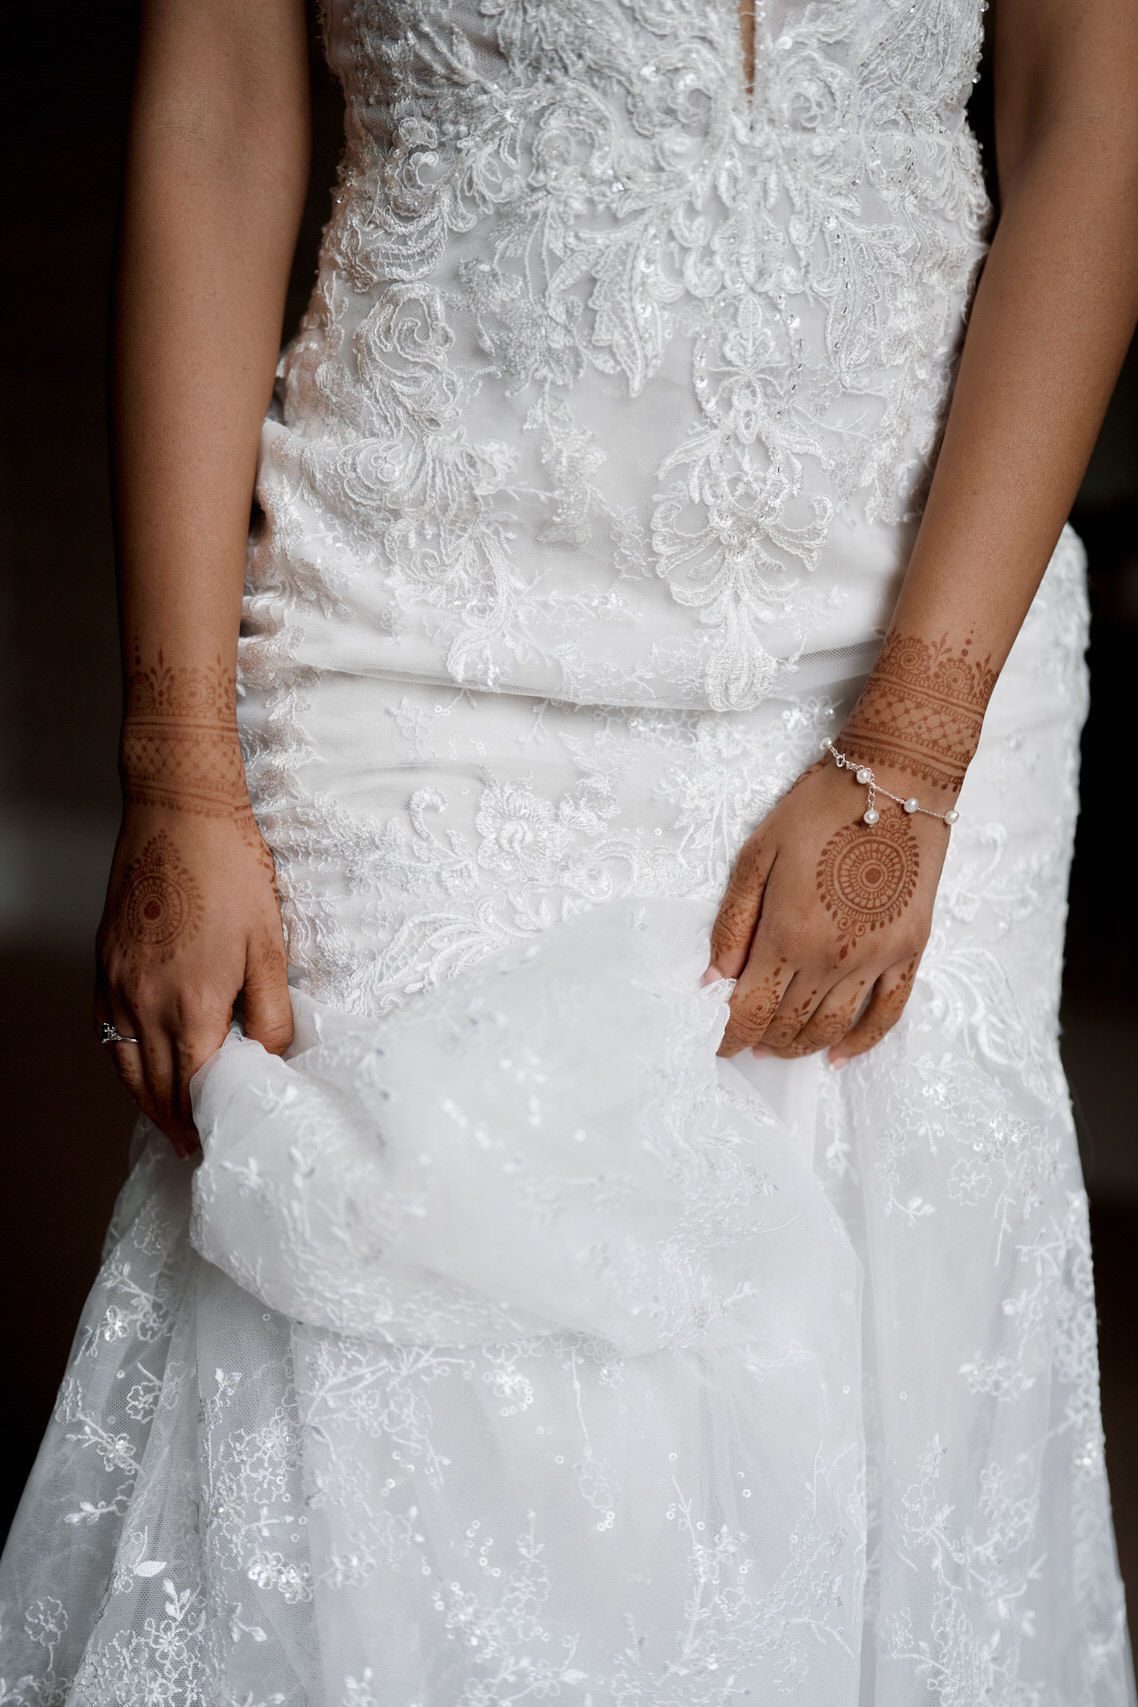 A bride wearing a white wedding dress and henna tattoos.